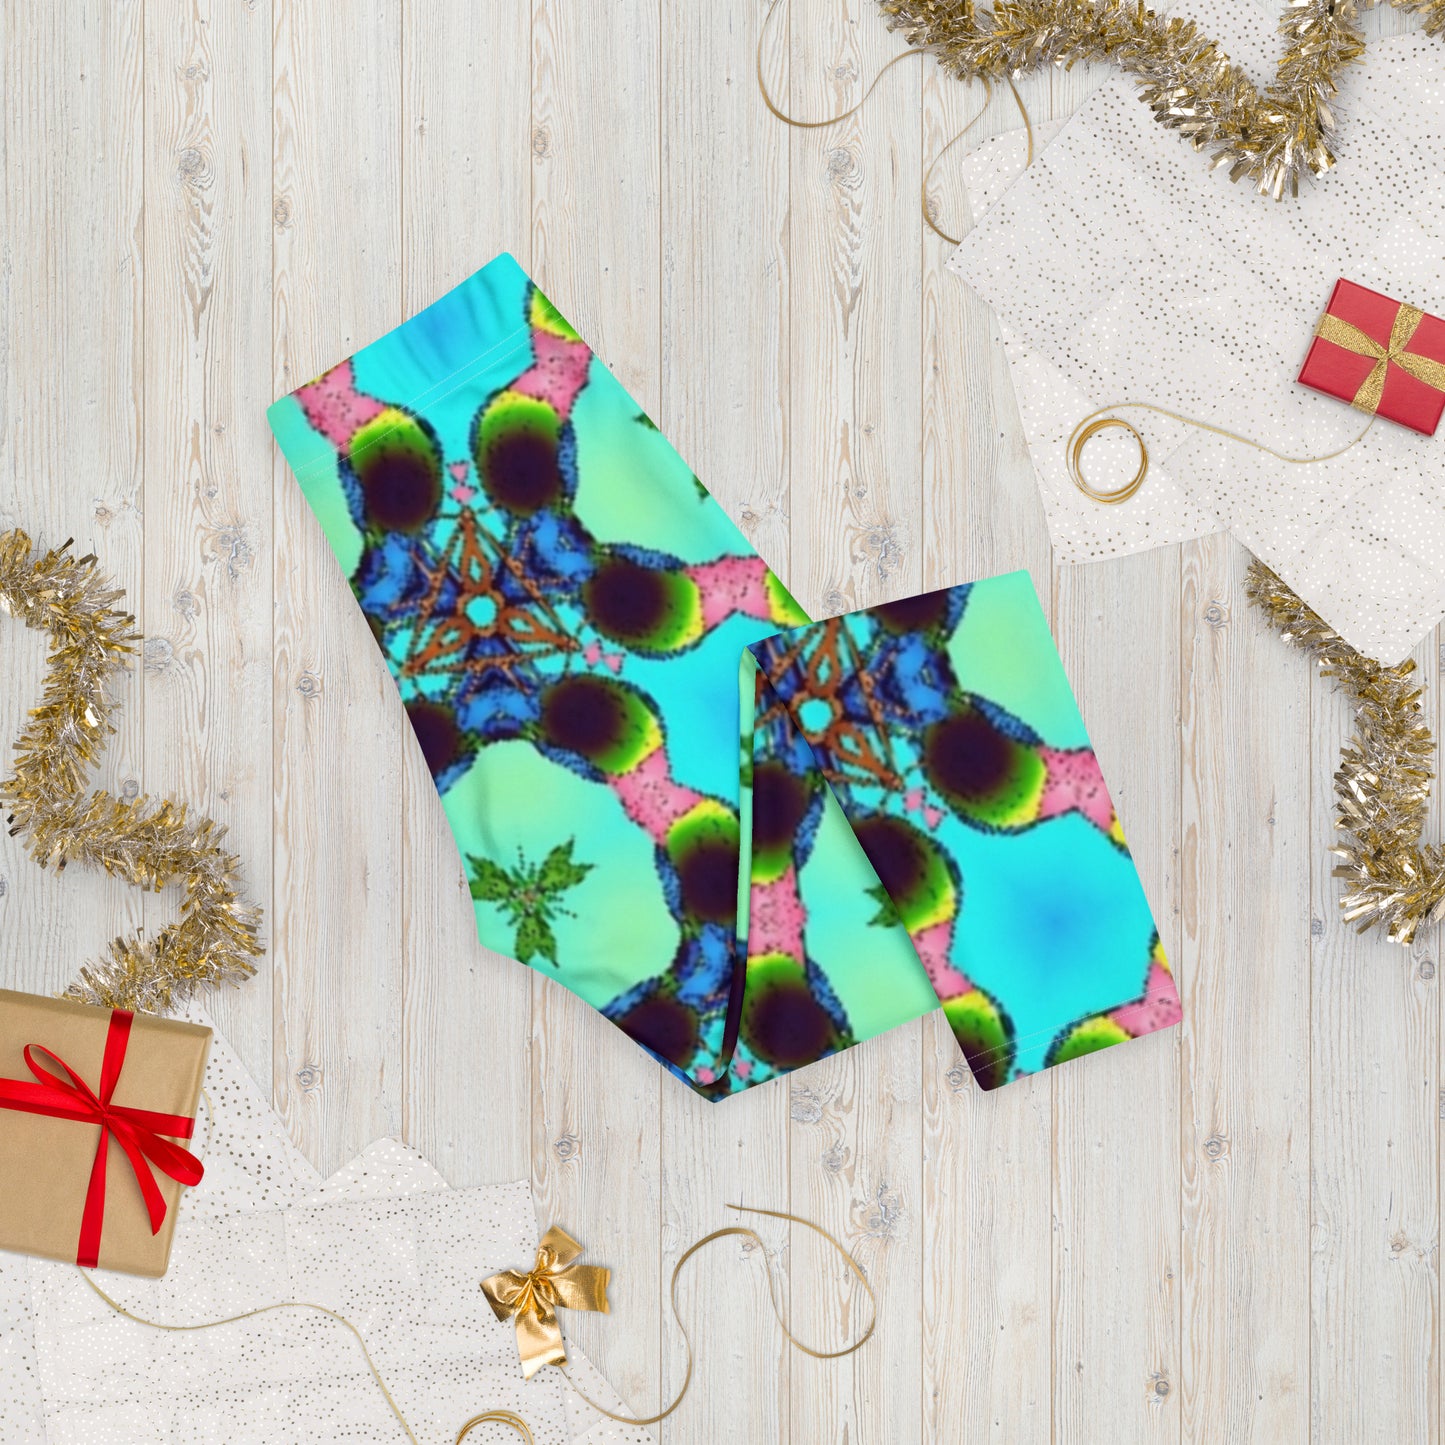 Abstract Capri Leggings - O By Onica Online Store